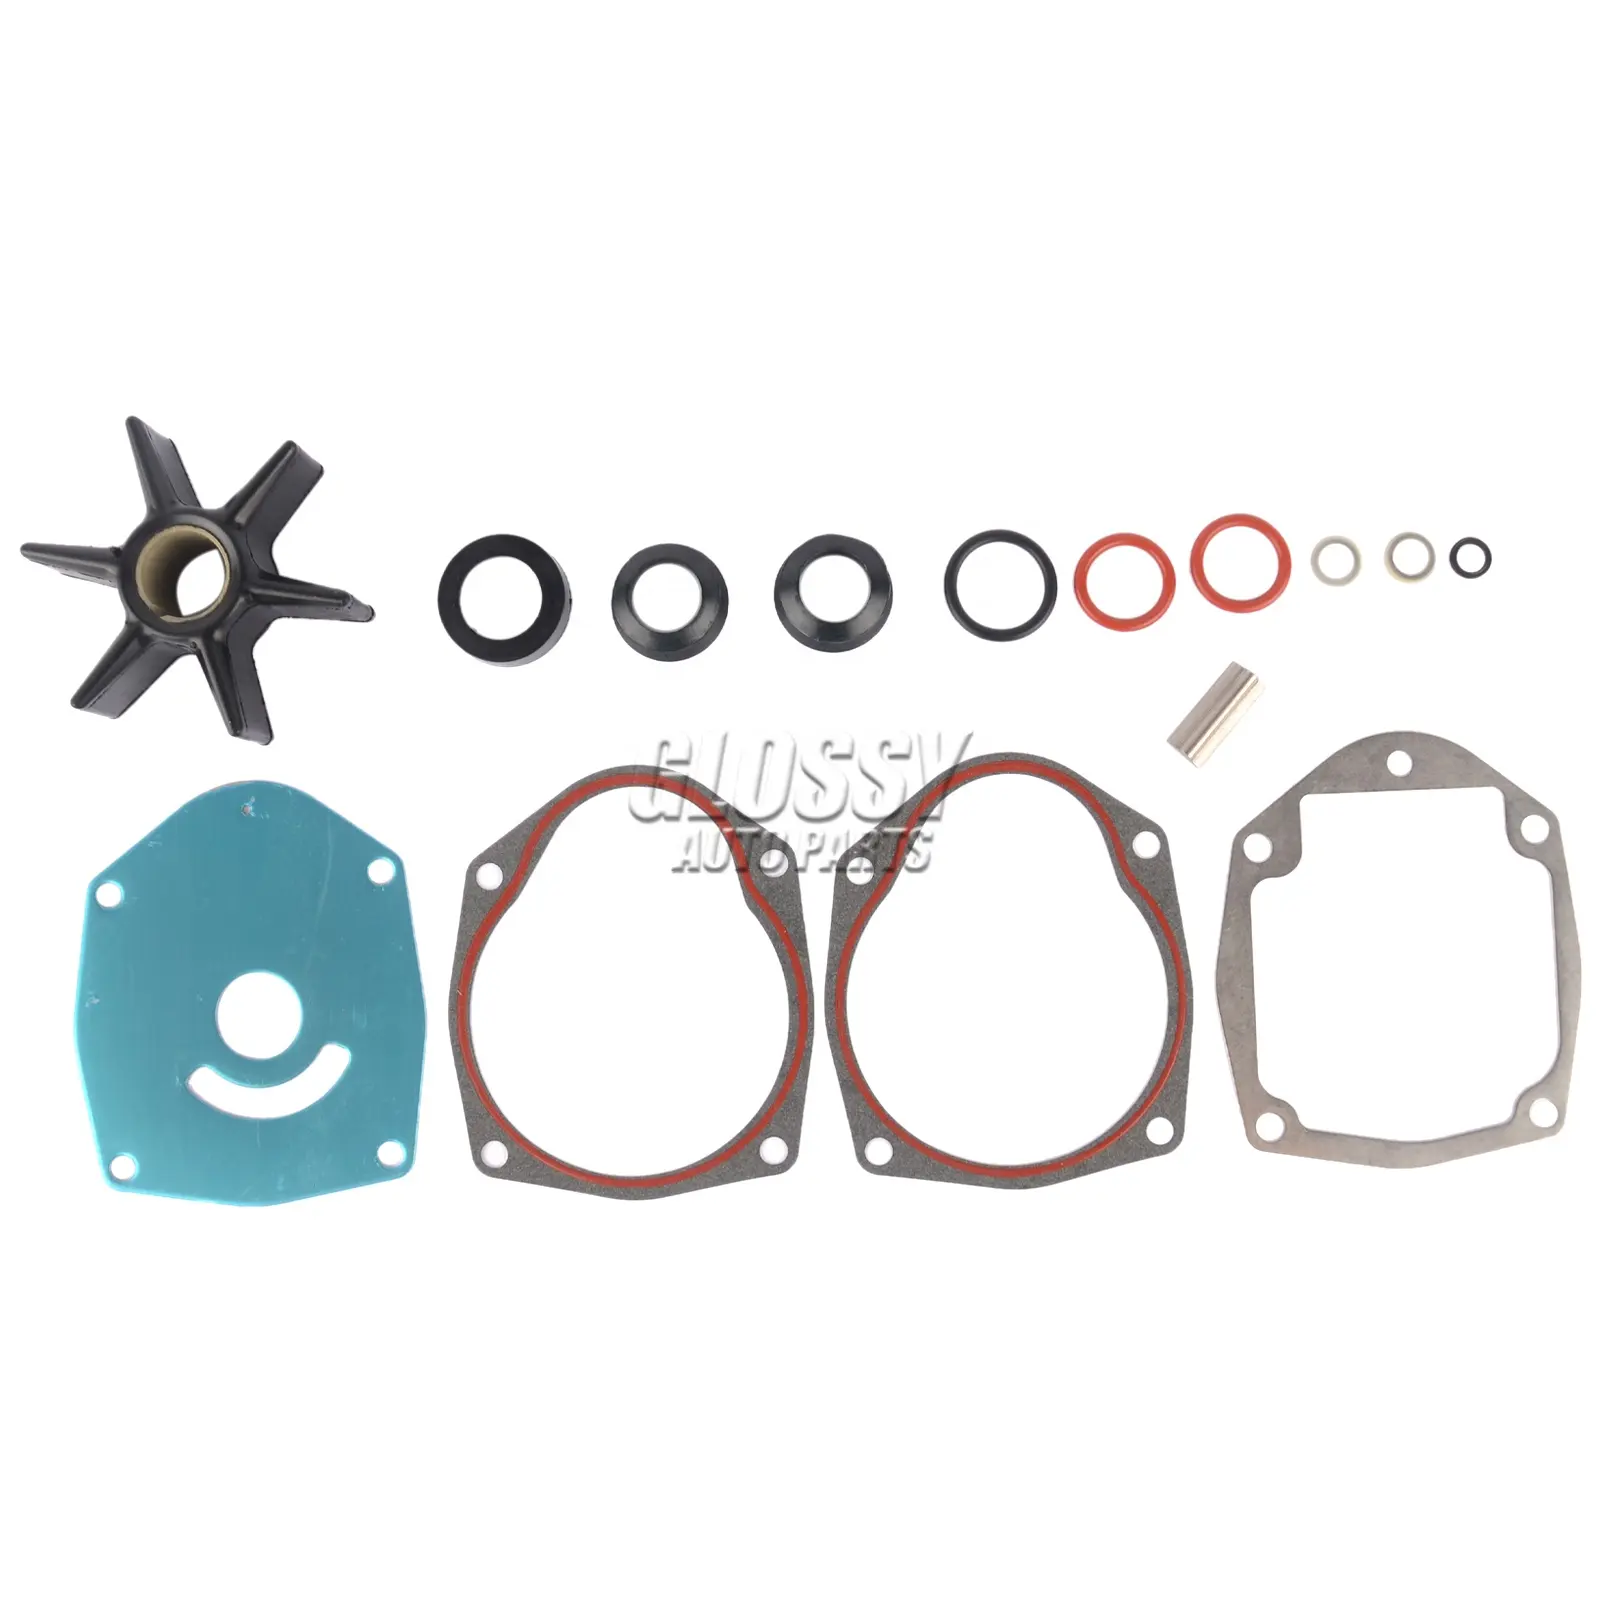 Glossy Water Pump Repair Kit For Alpha One Gen 2 8M0100526 46-43024A7 47-43026K06 47-43026Q0